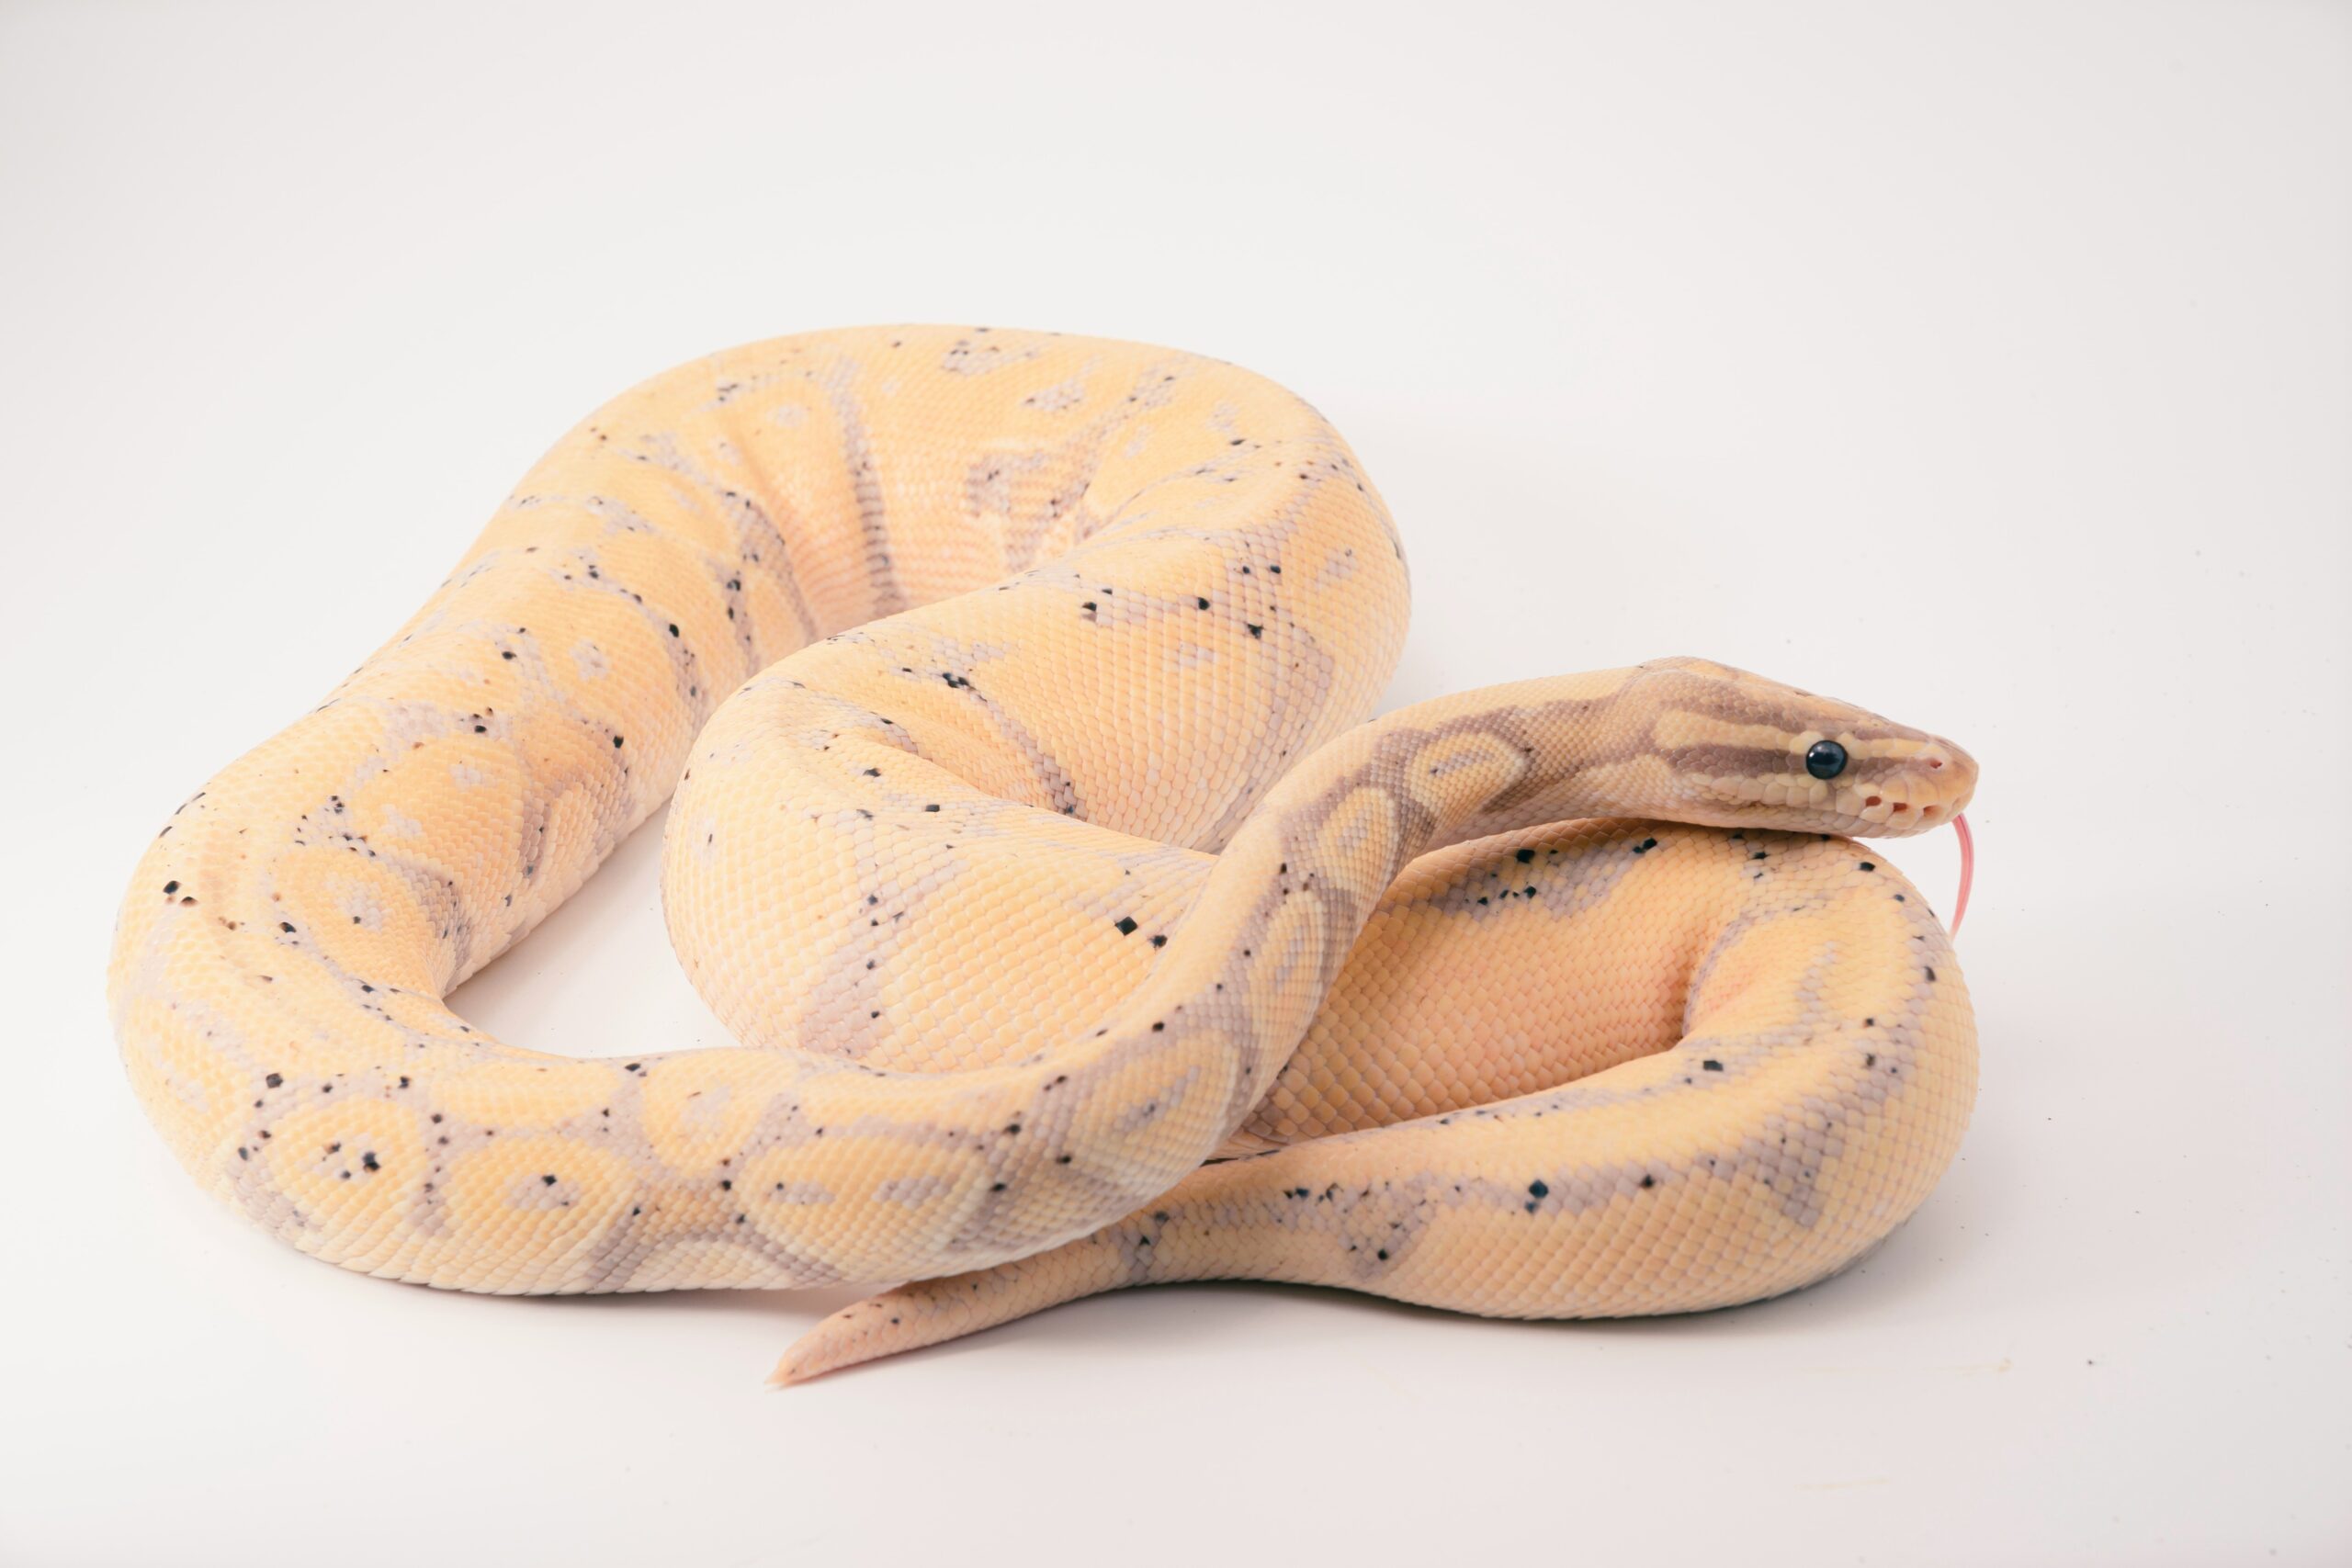 How to Care for Common Pet Snake Breeds